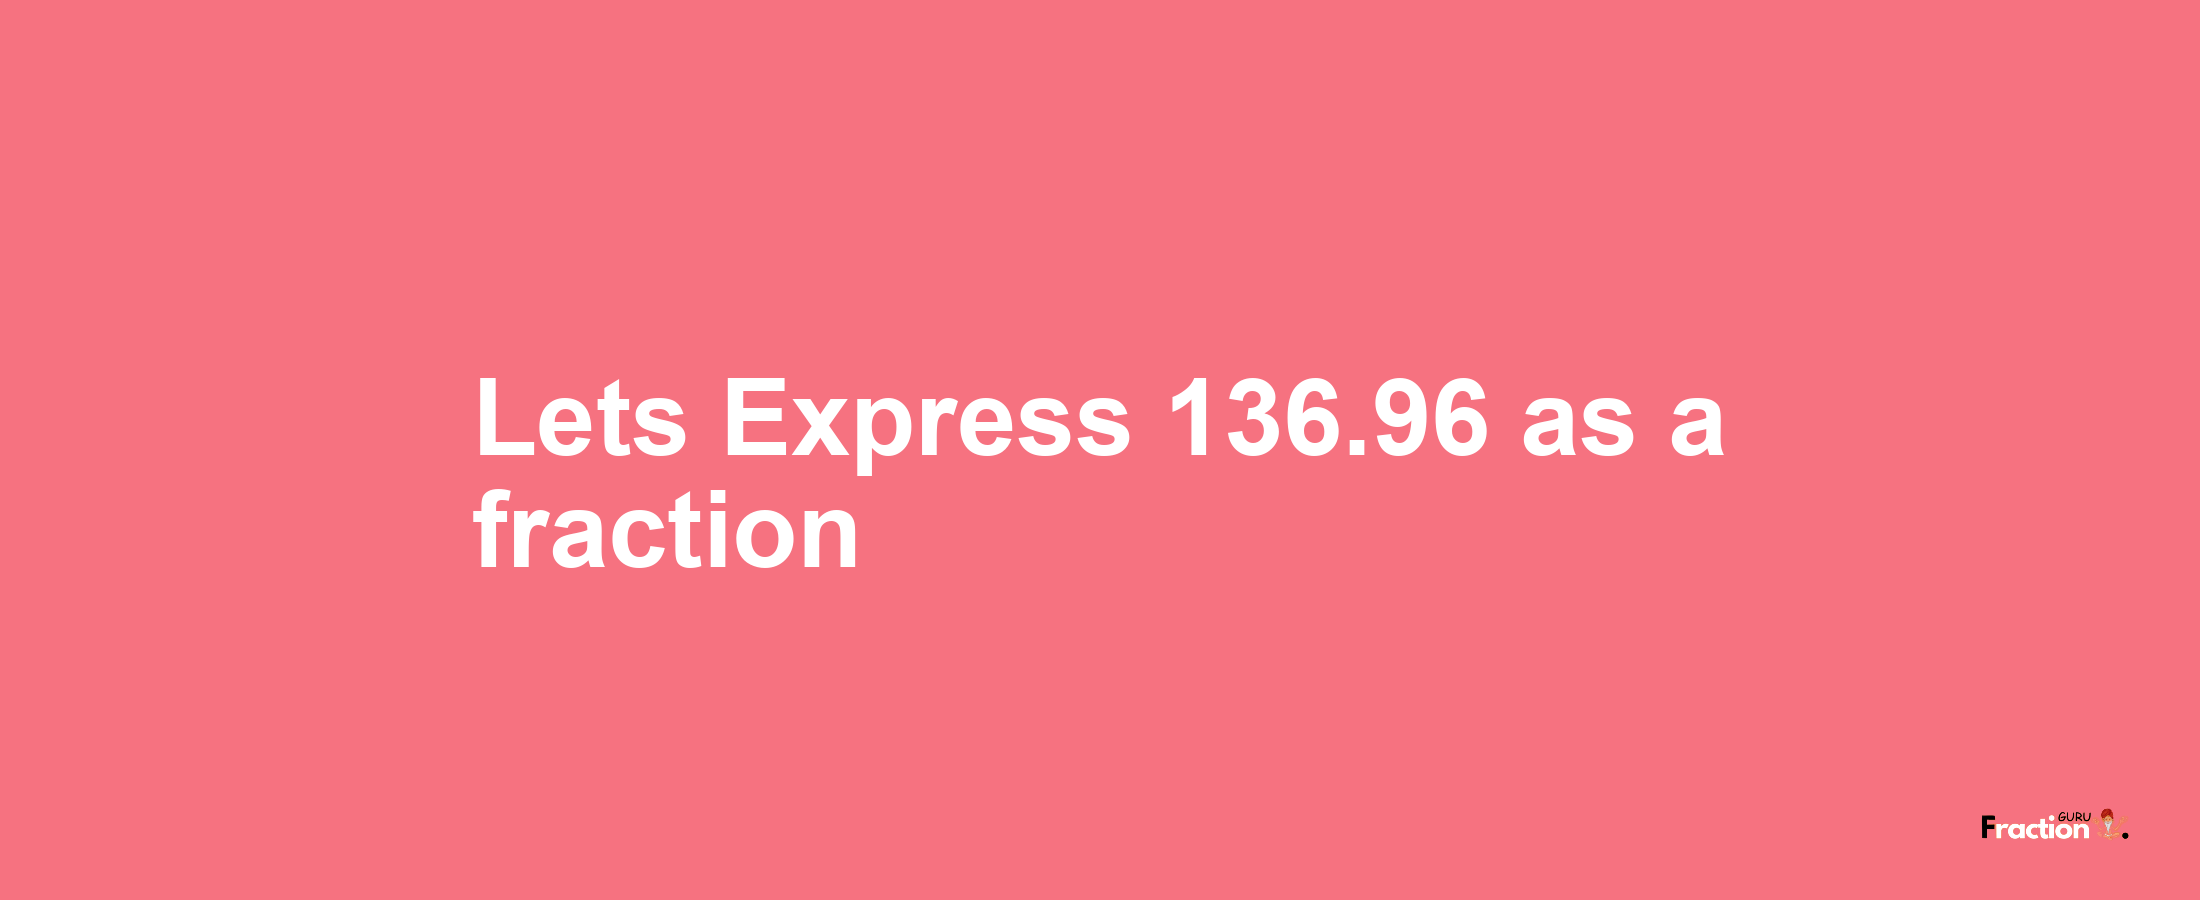 Lets Express 136.96 as afraction